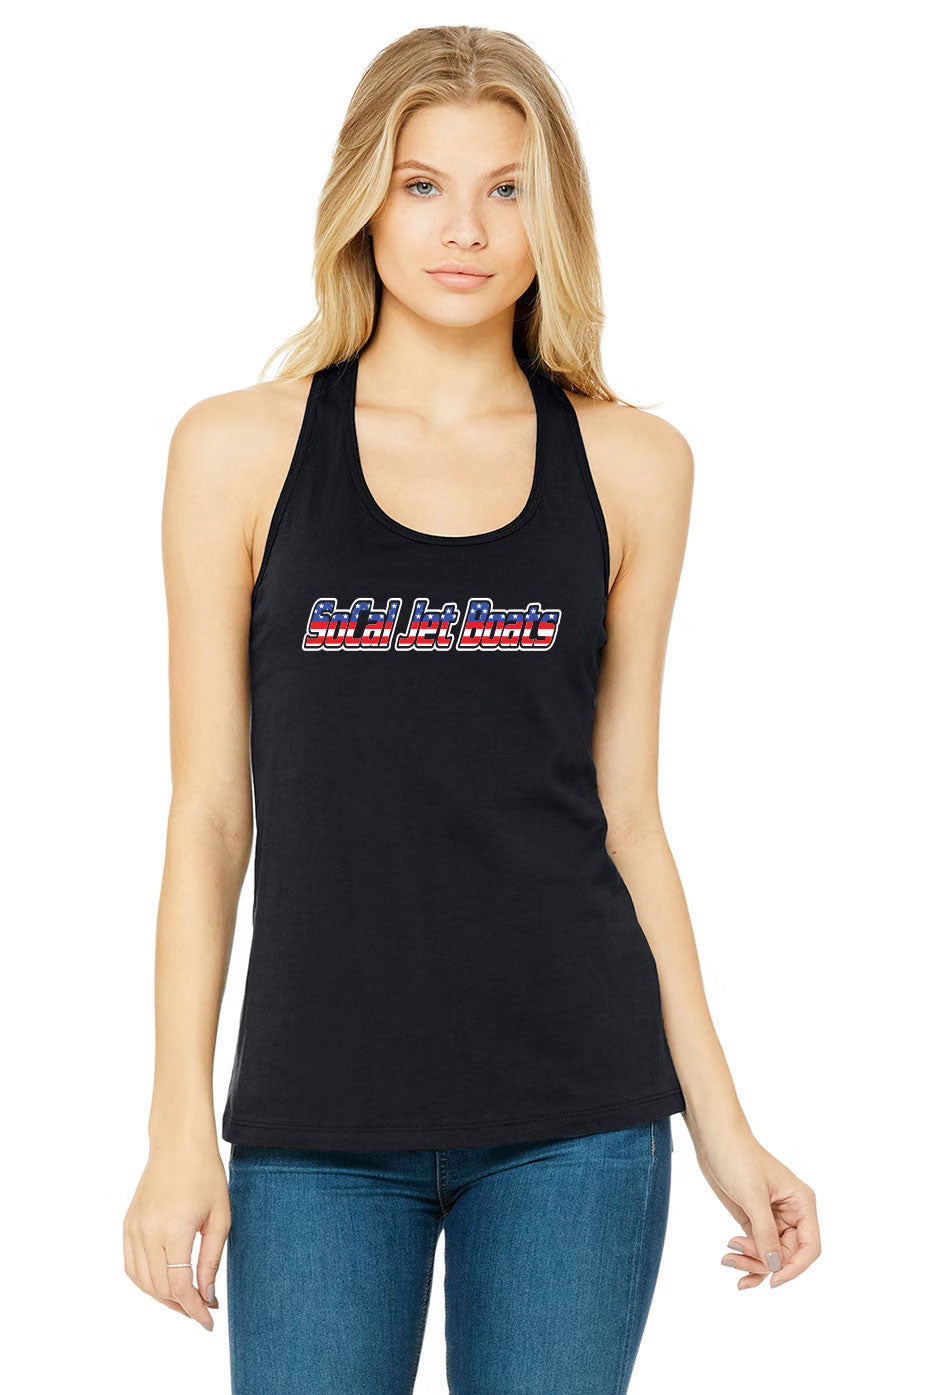 The Patriot Jet Boat Womens Tank Top